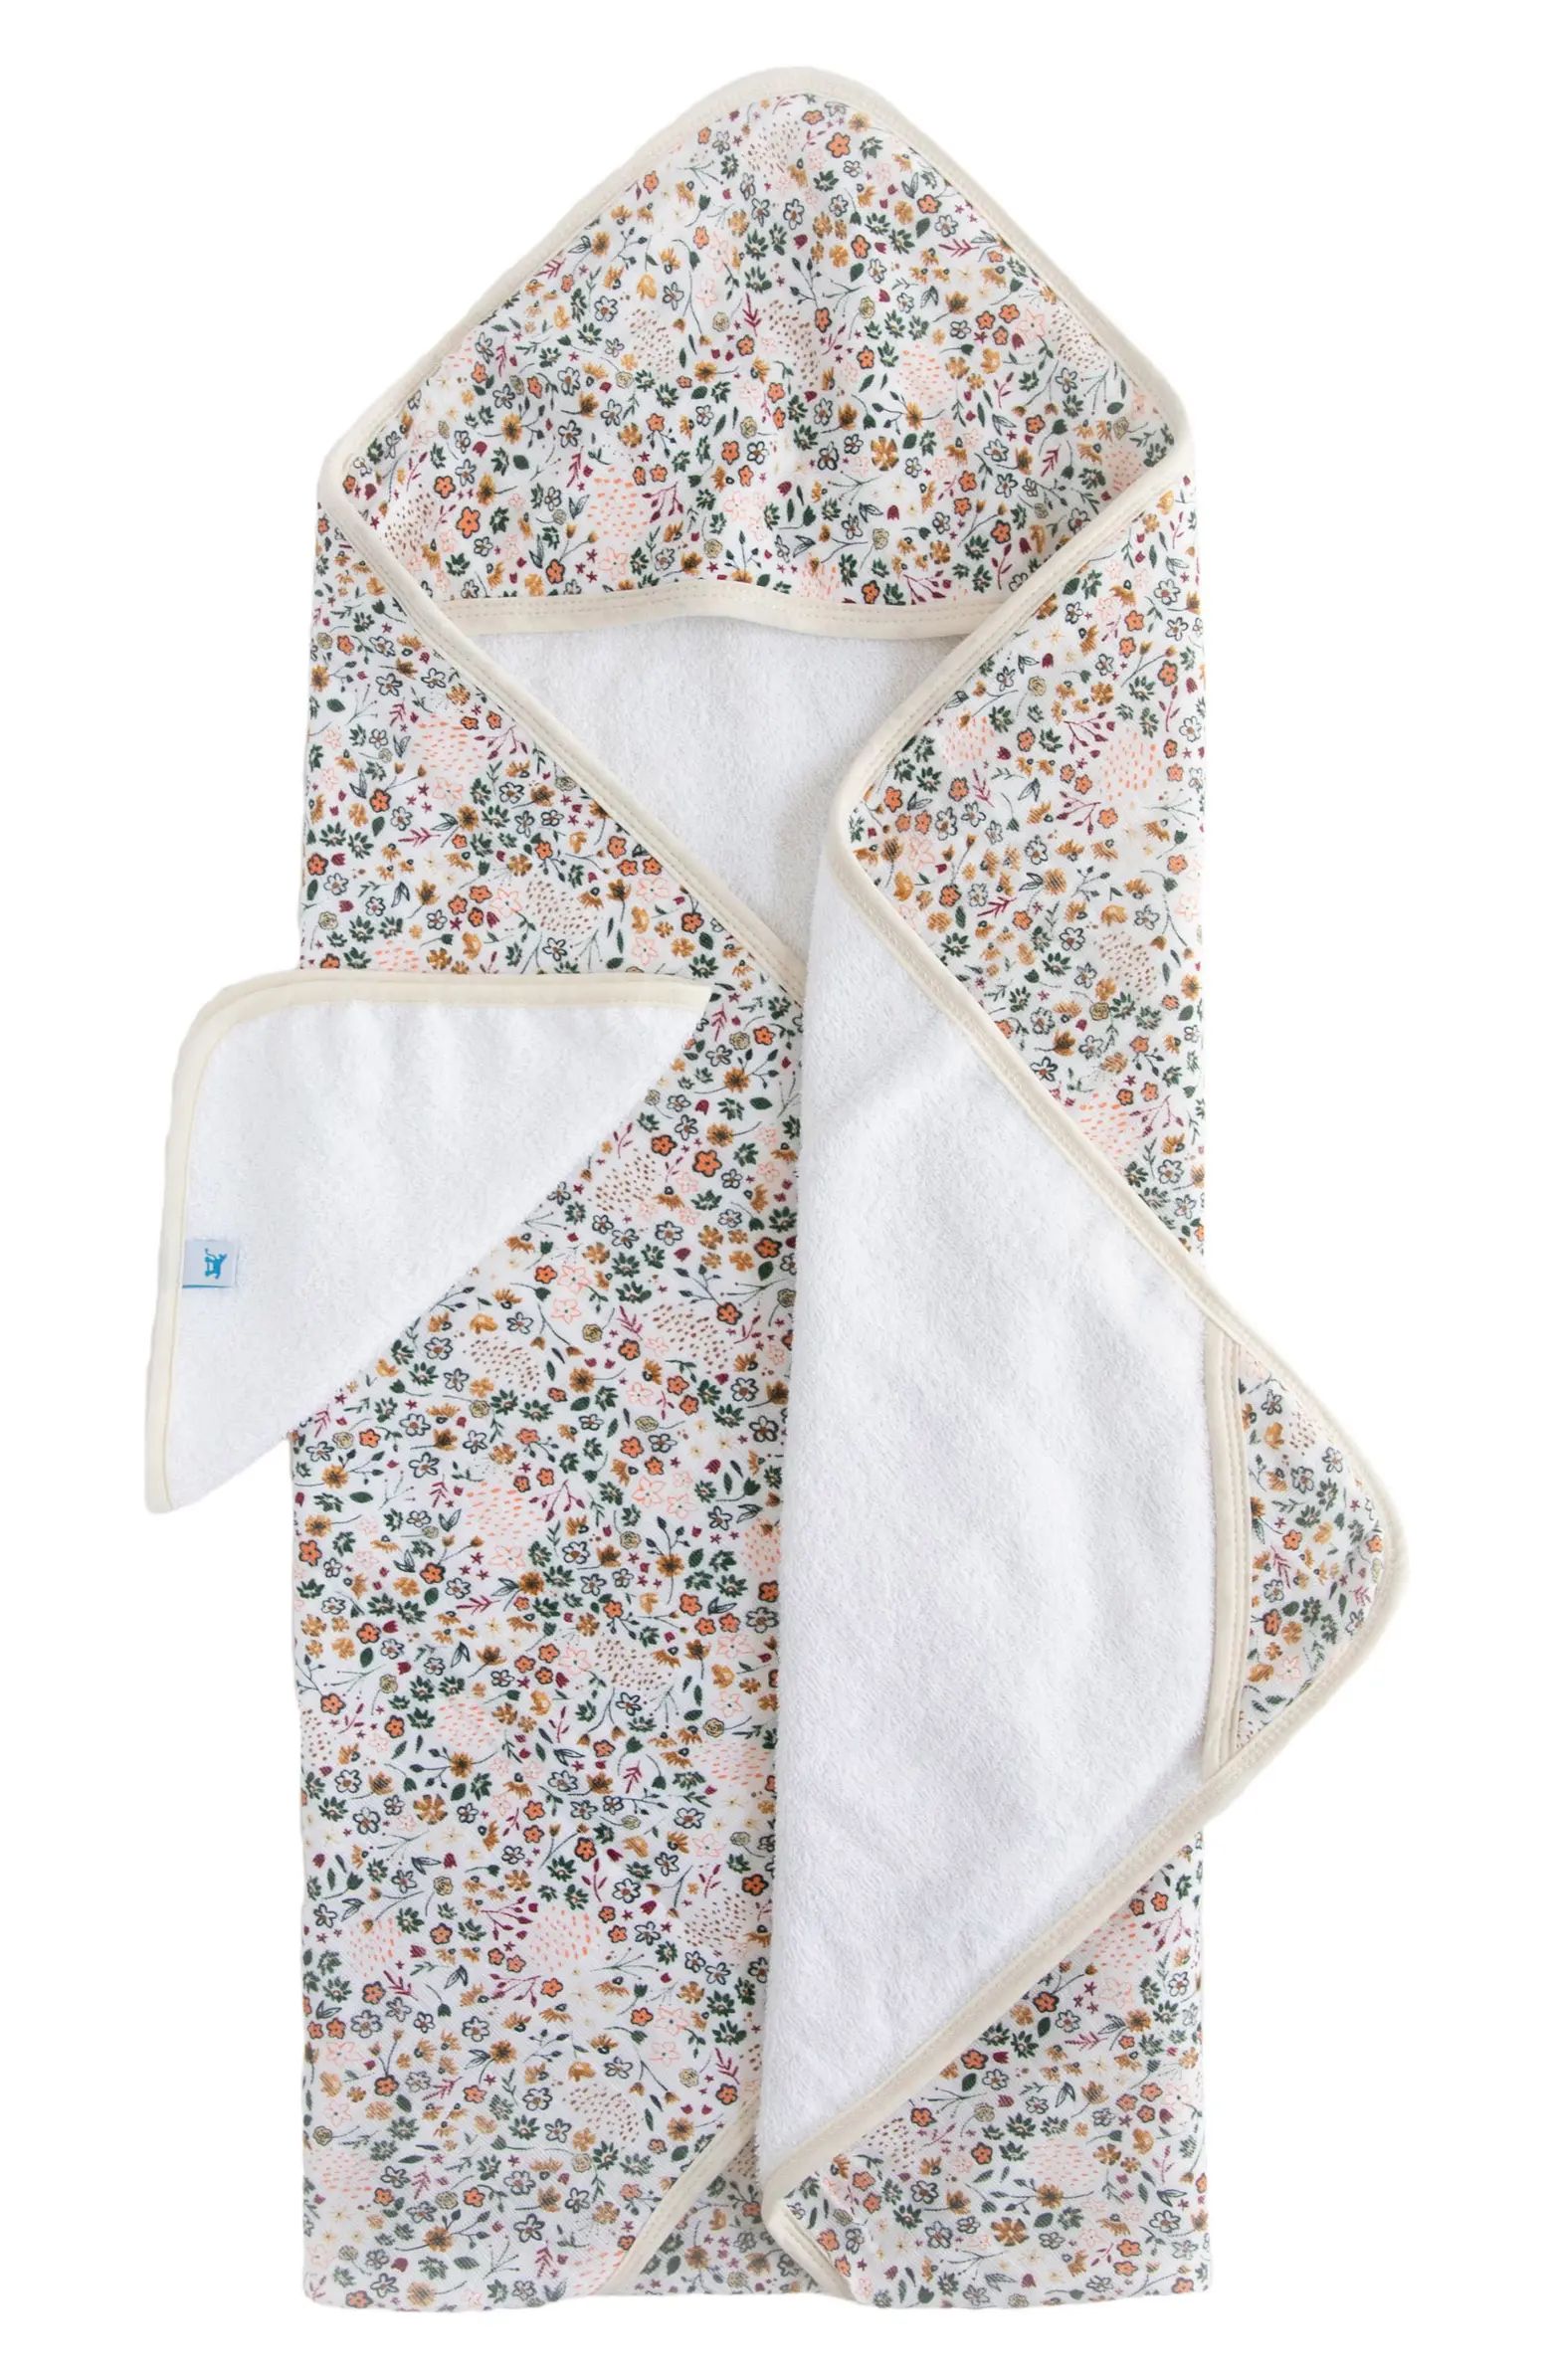 Cotton Muslin & Terry Hooded Towel | Nordstrom